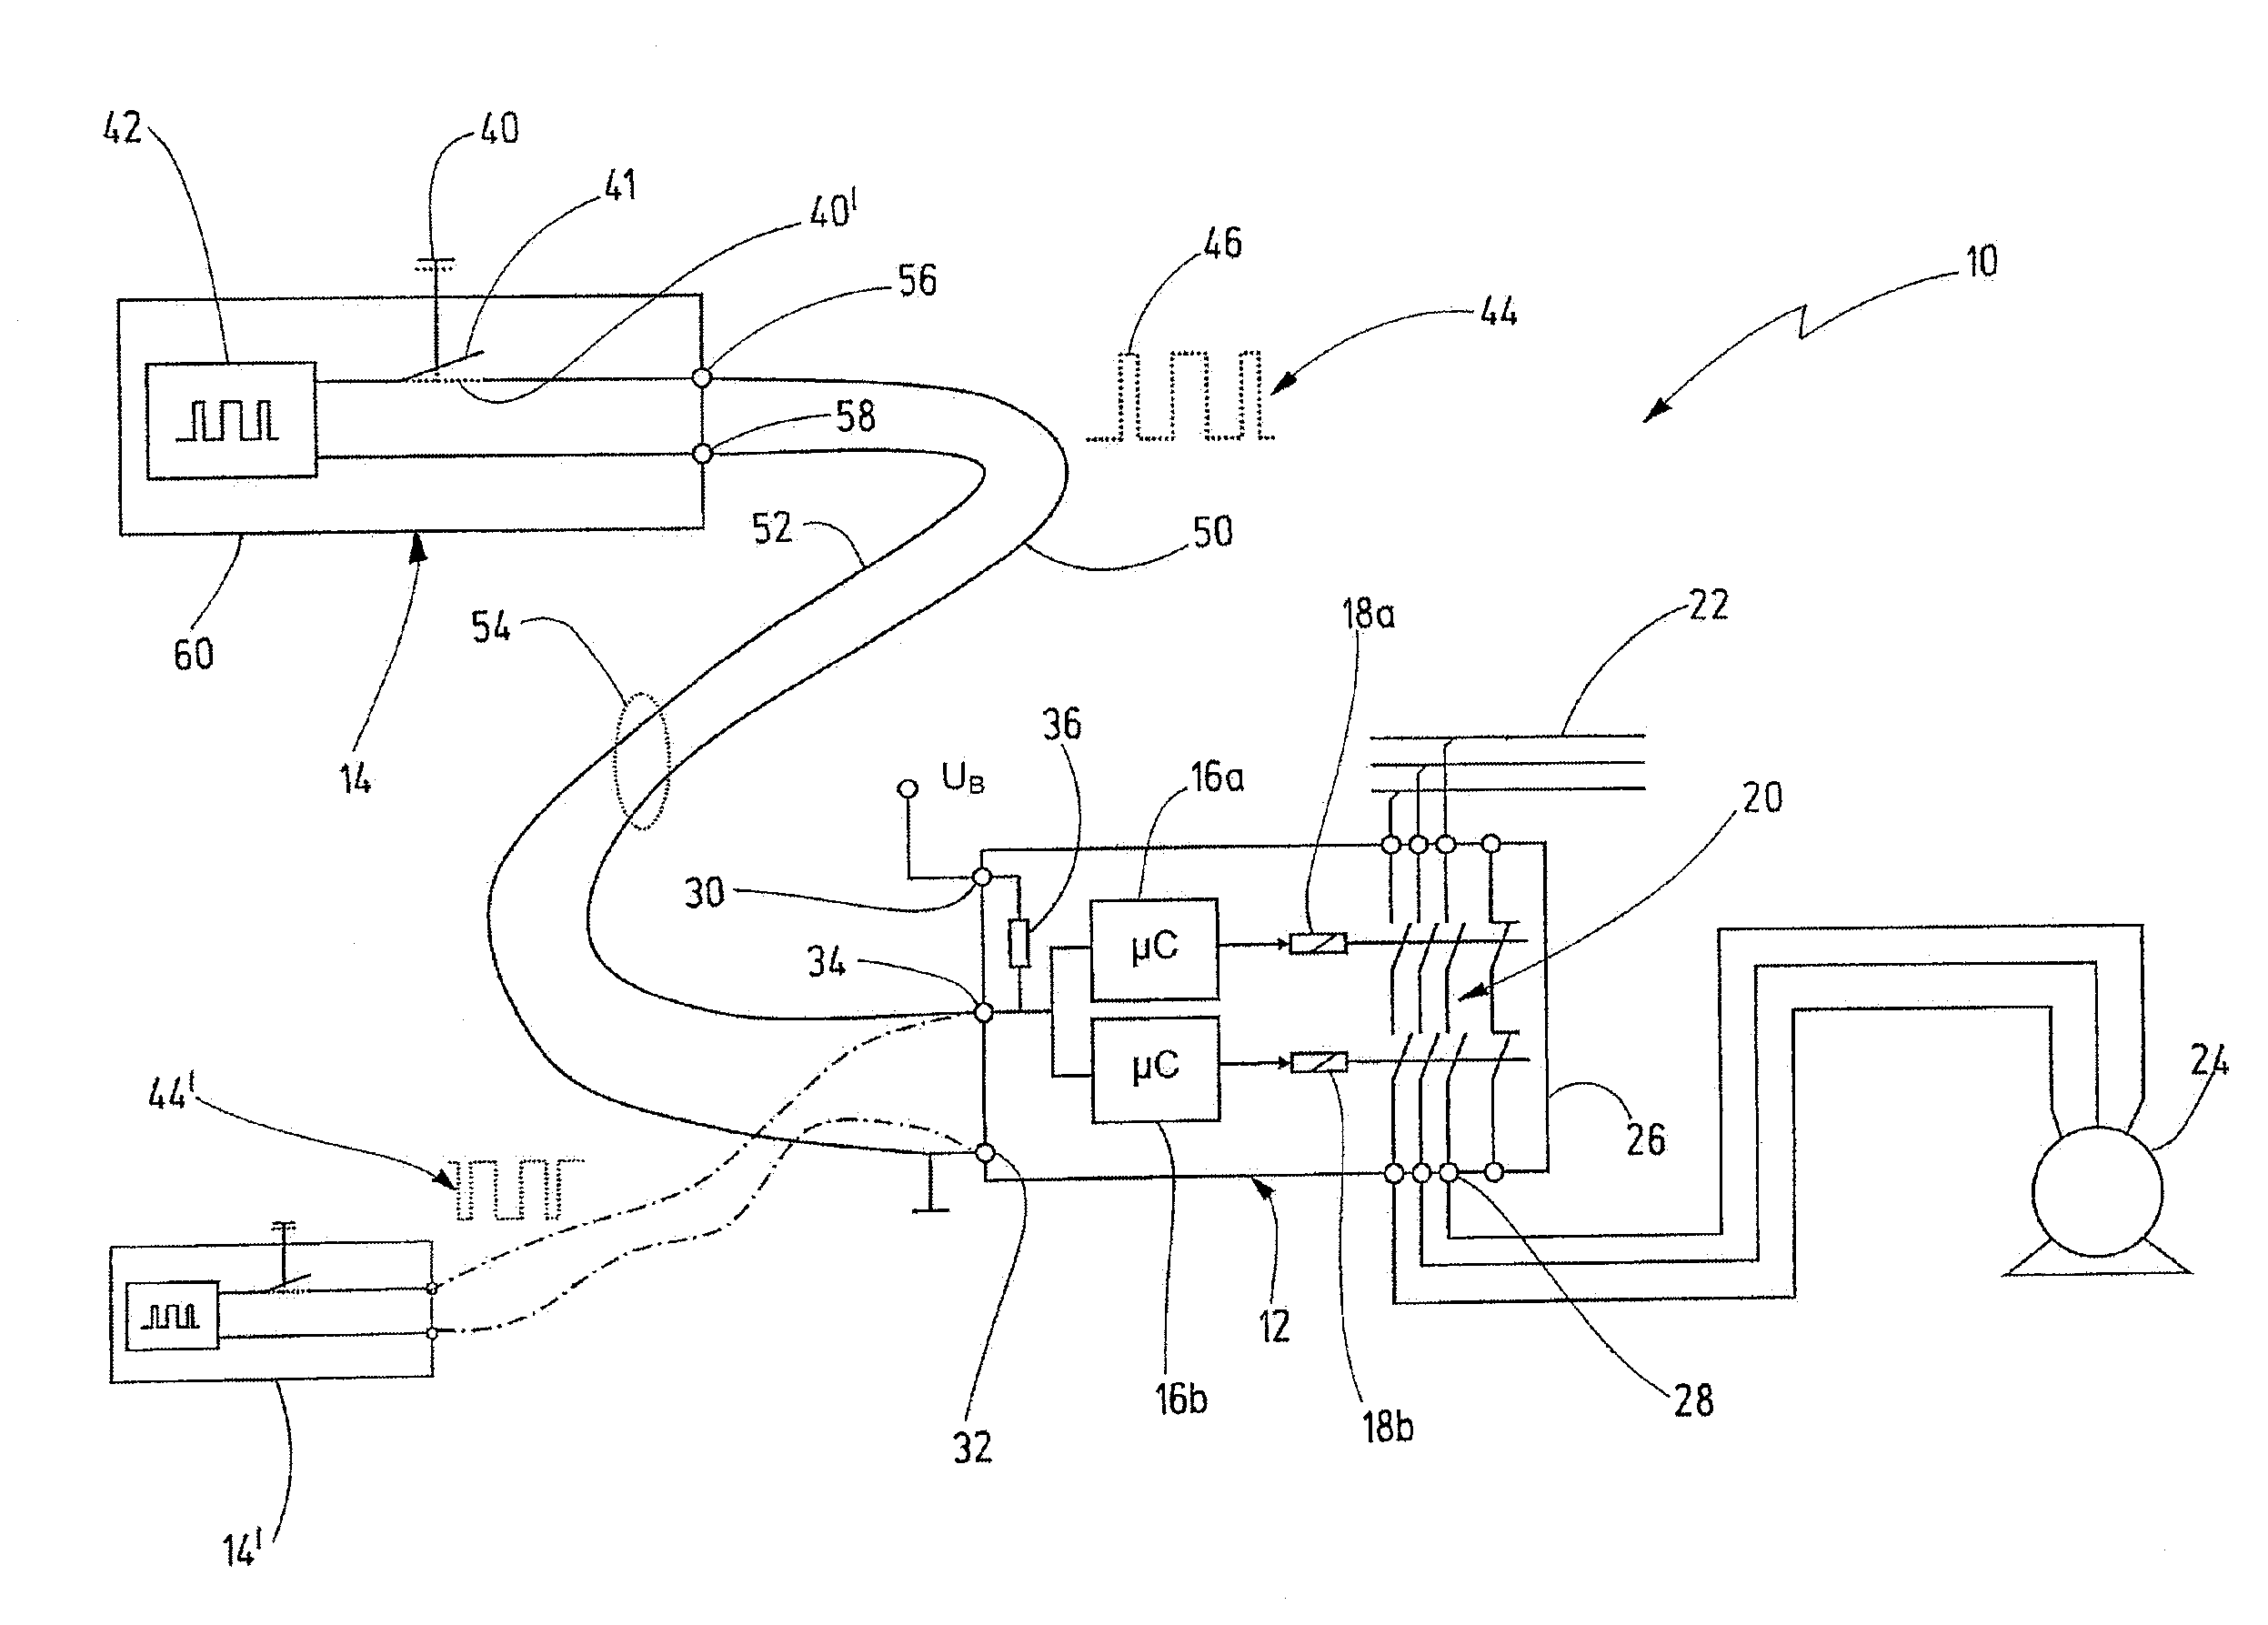 Safety circuit arrangement for connection or failsafe disconnection of a hazardous  installation